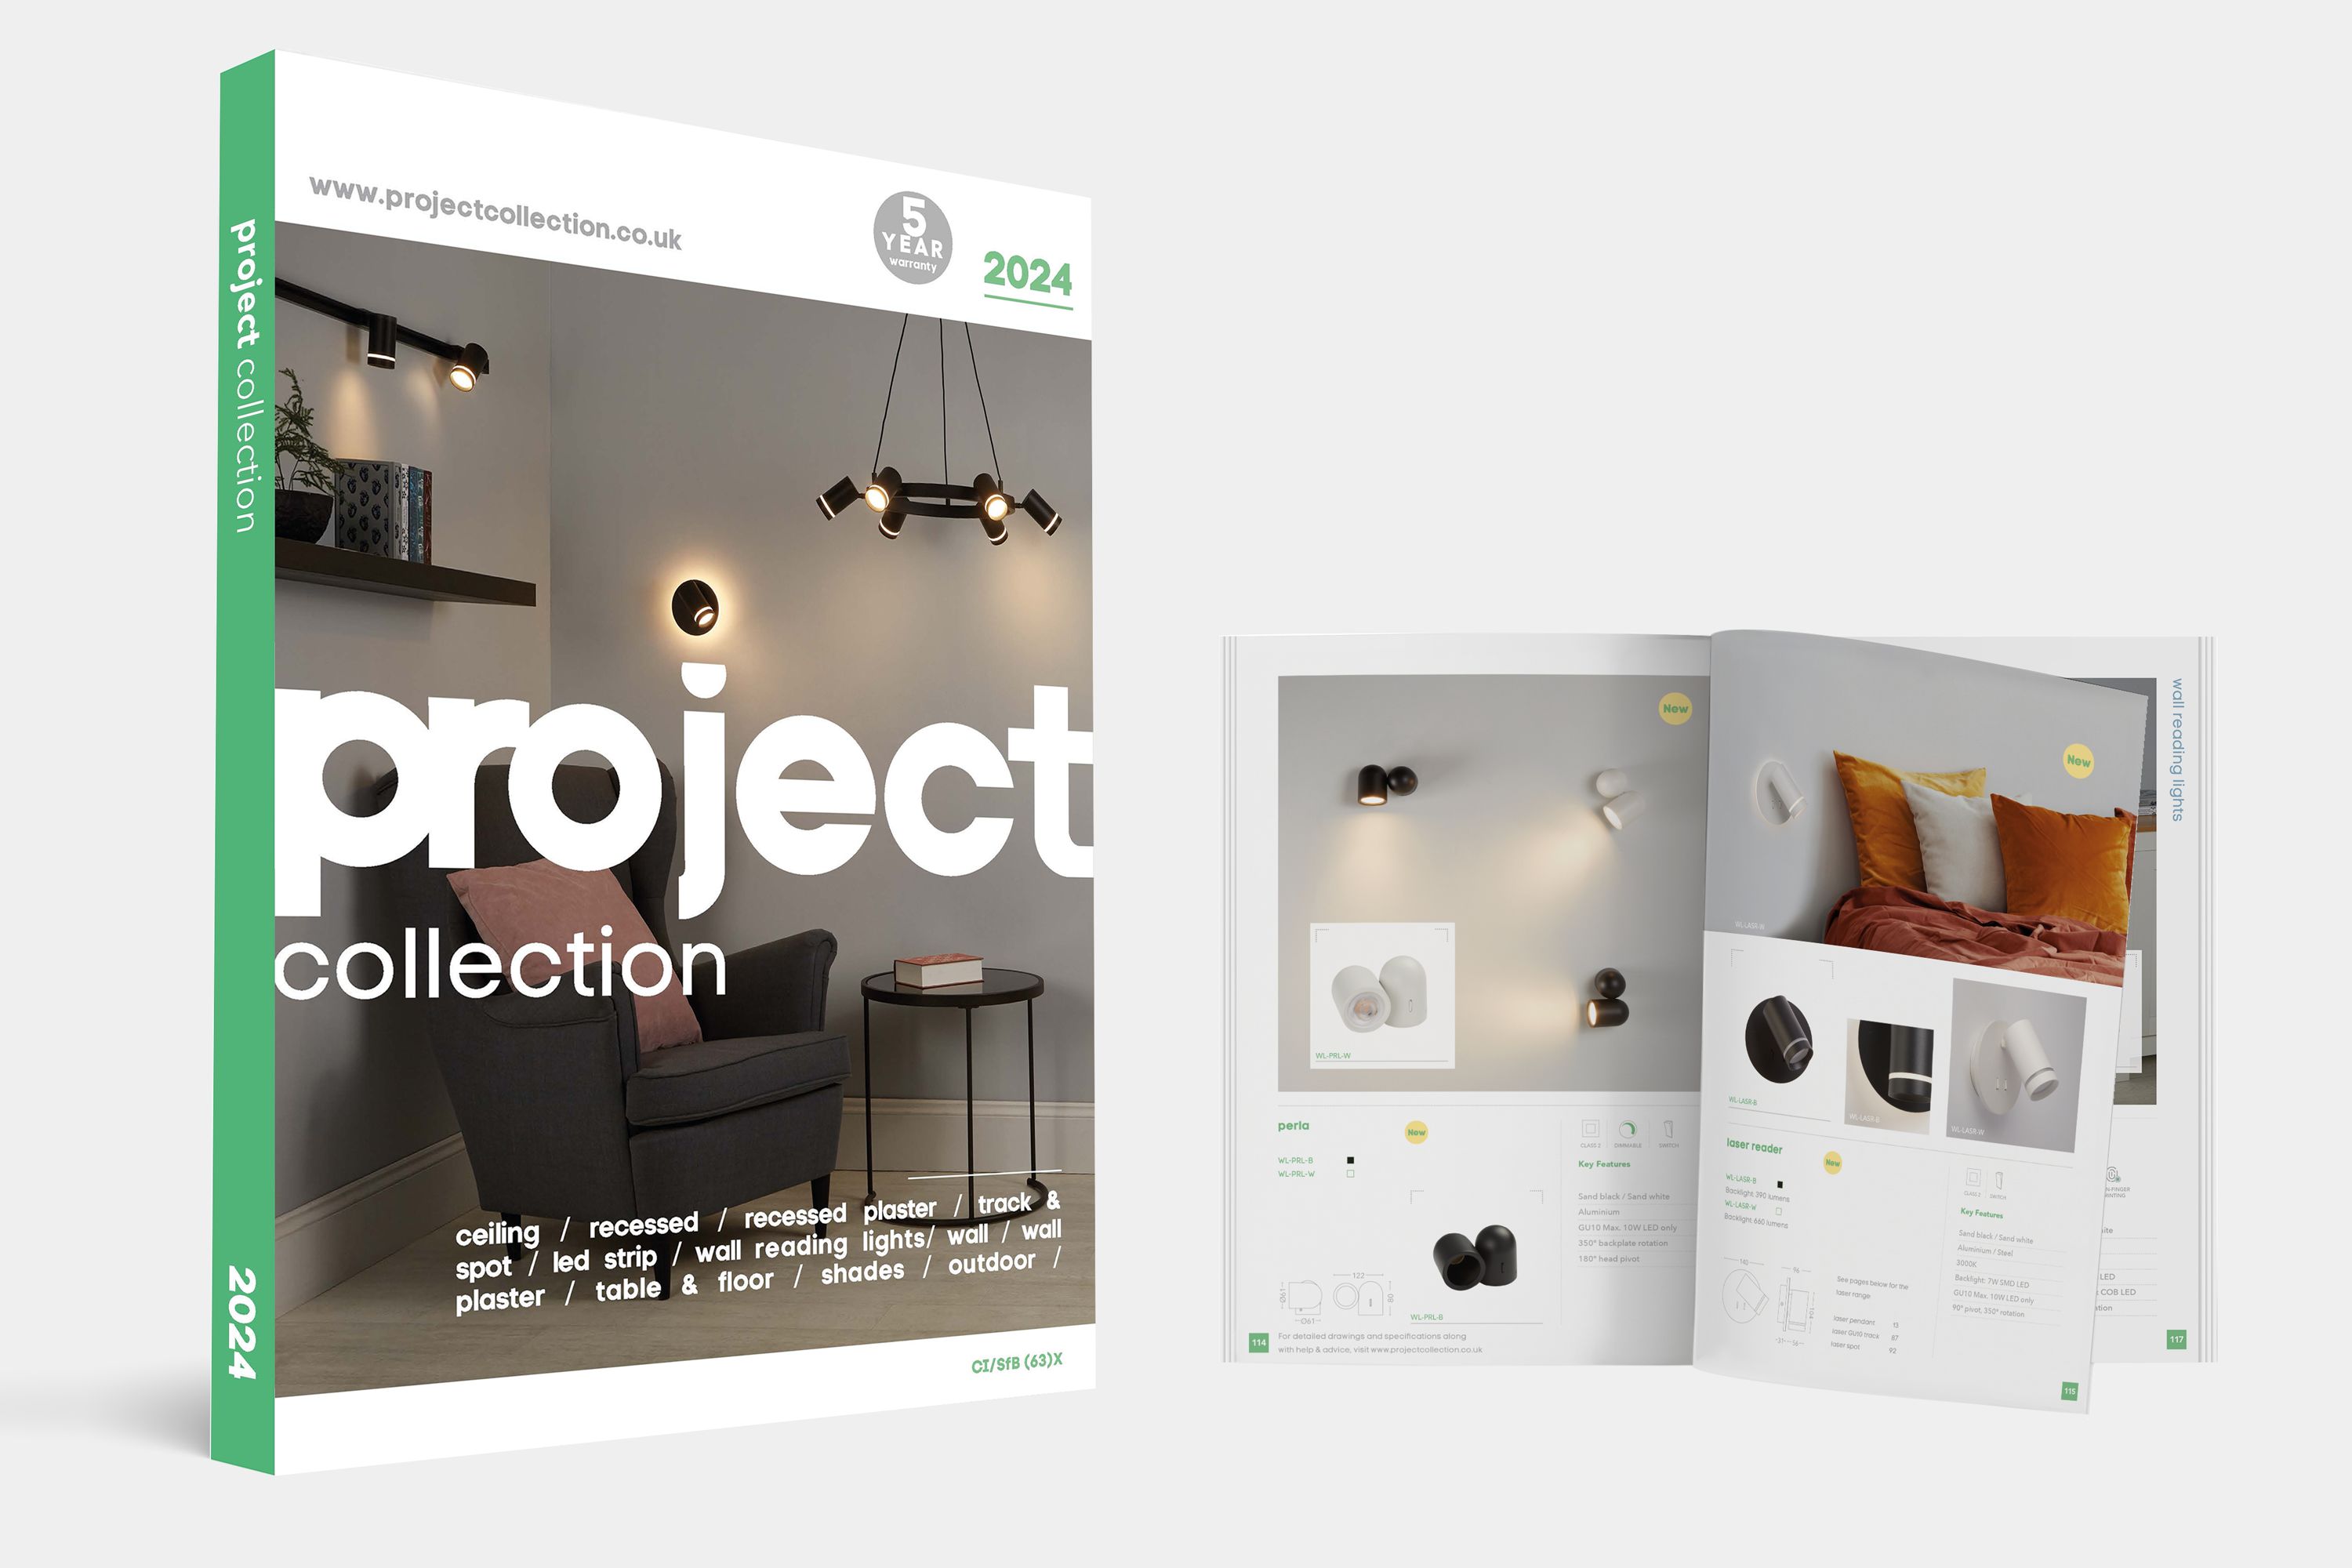 image of the project collection catalouge